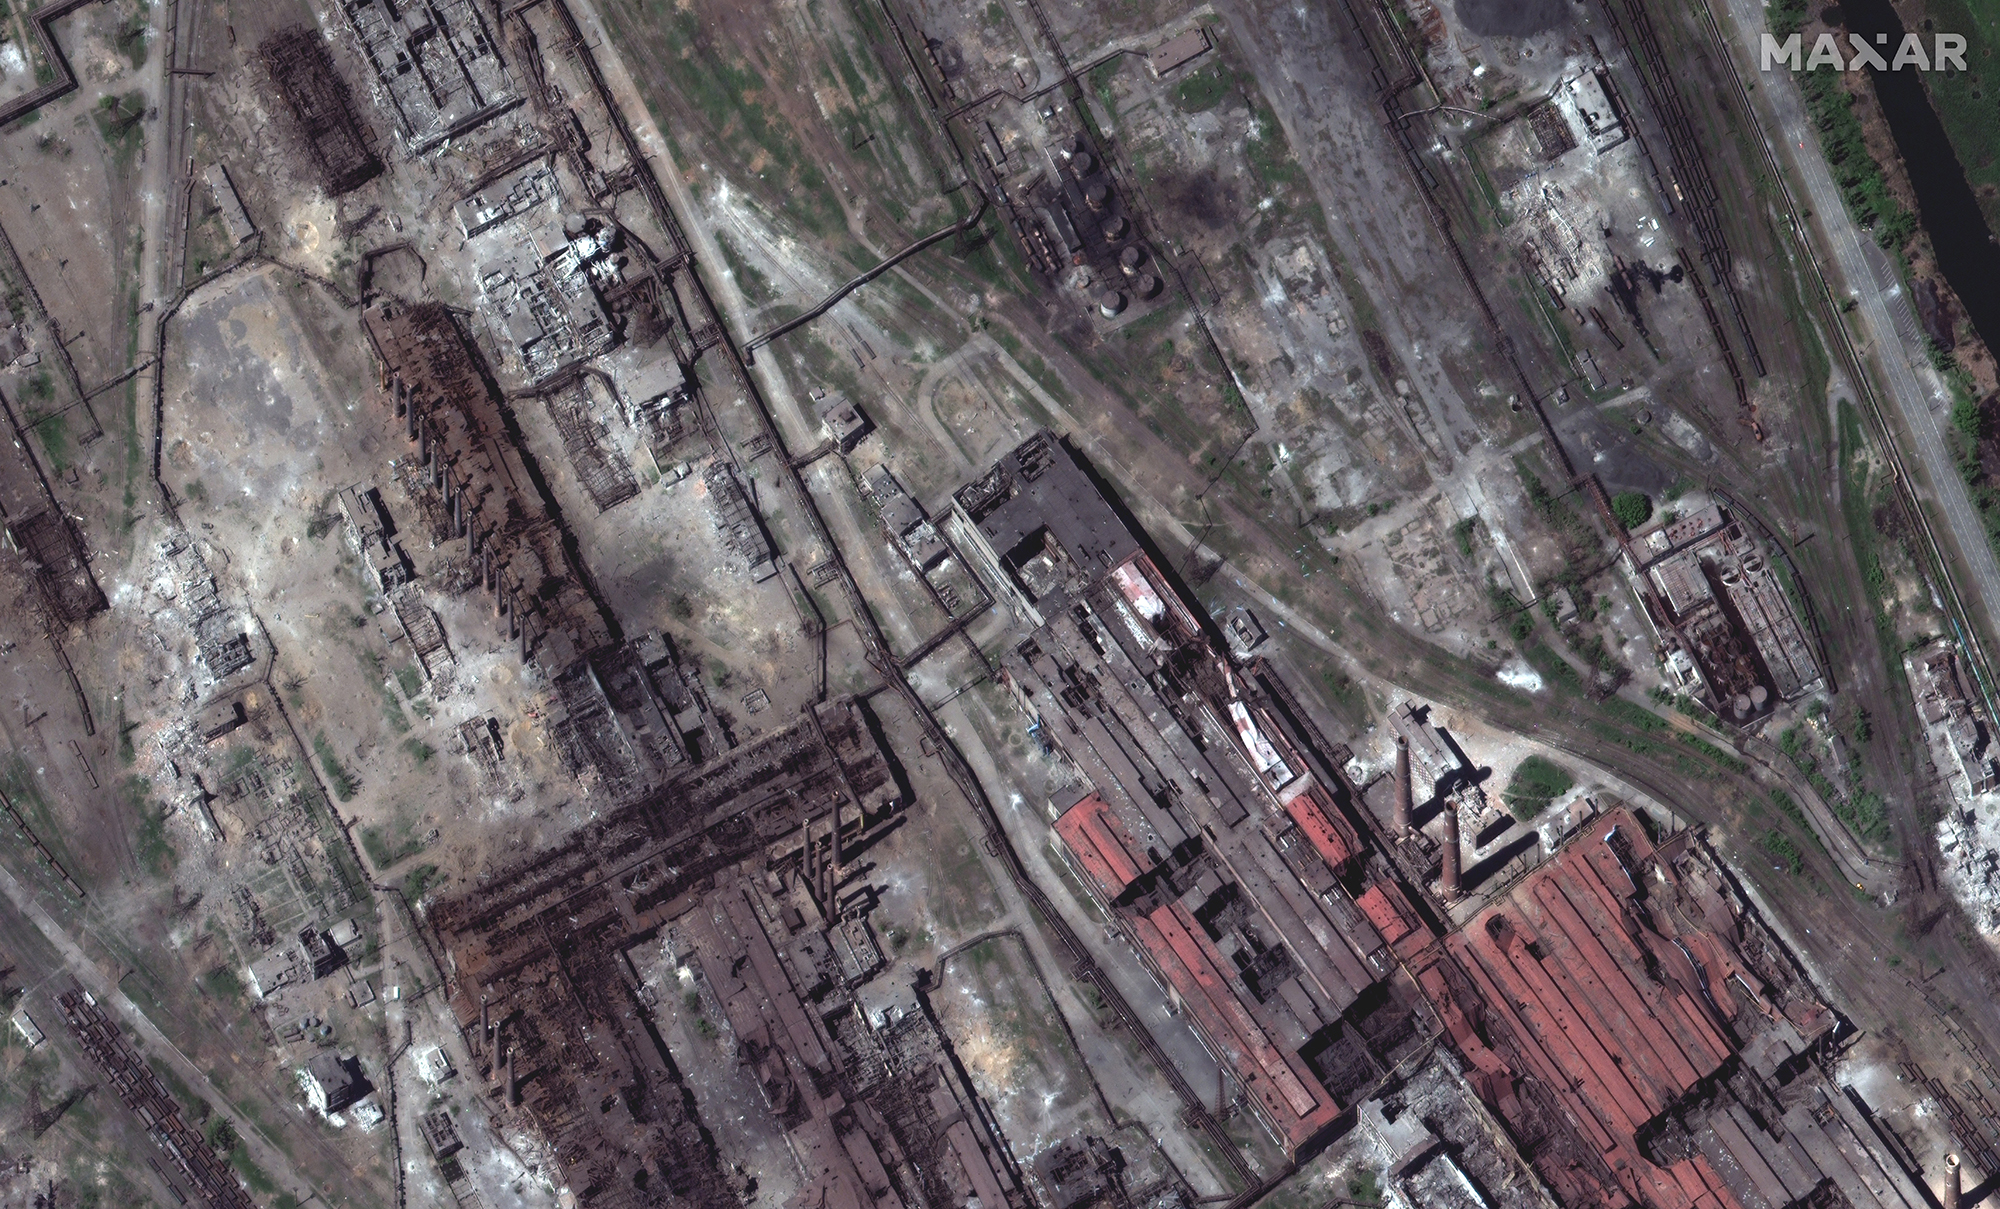 A closer lo Azovstal steel plant seen from above in Mariupol, Ukraine, on May 12.